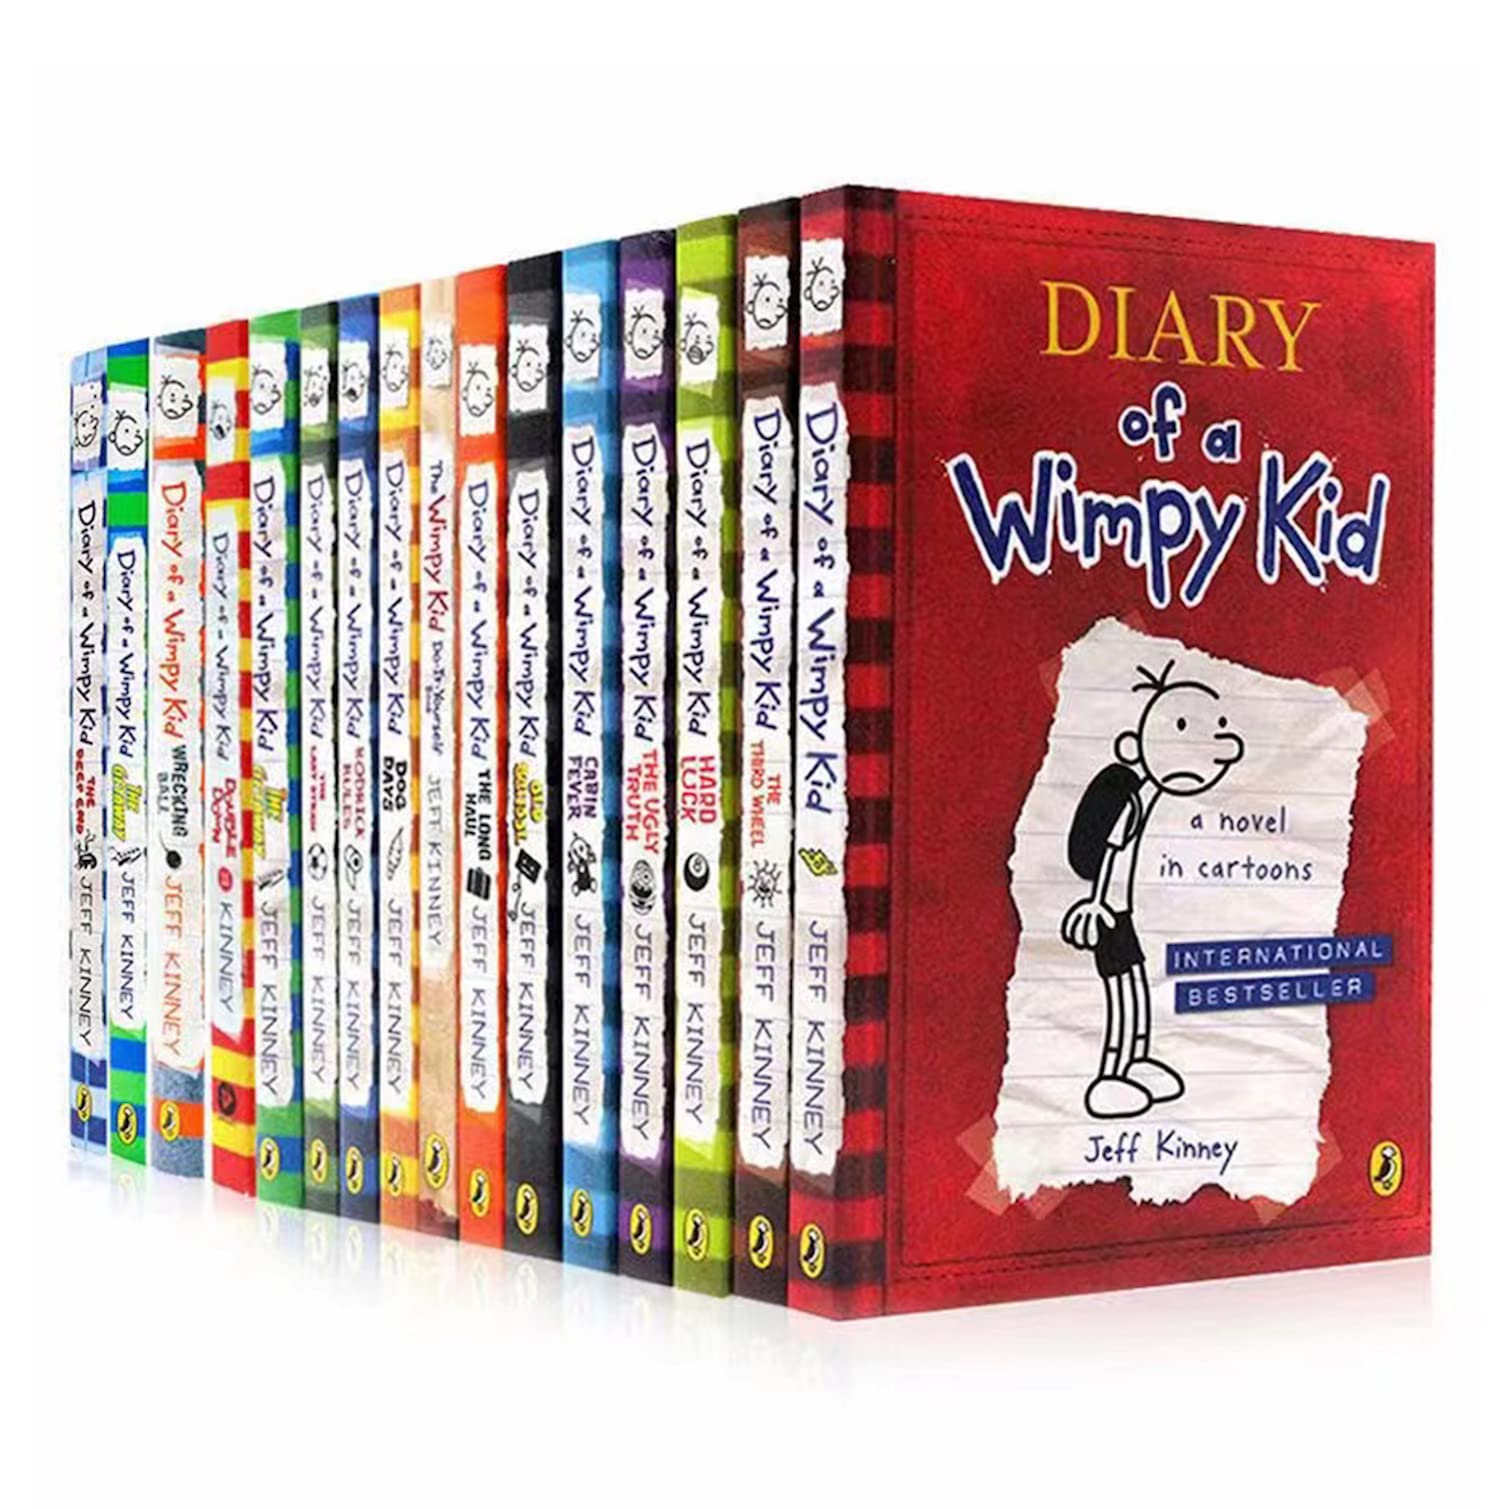 Buy Jeff Kinney Diary of a Wimpy Kid 16 Books Collection Set, Complete